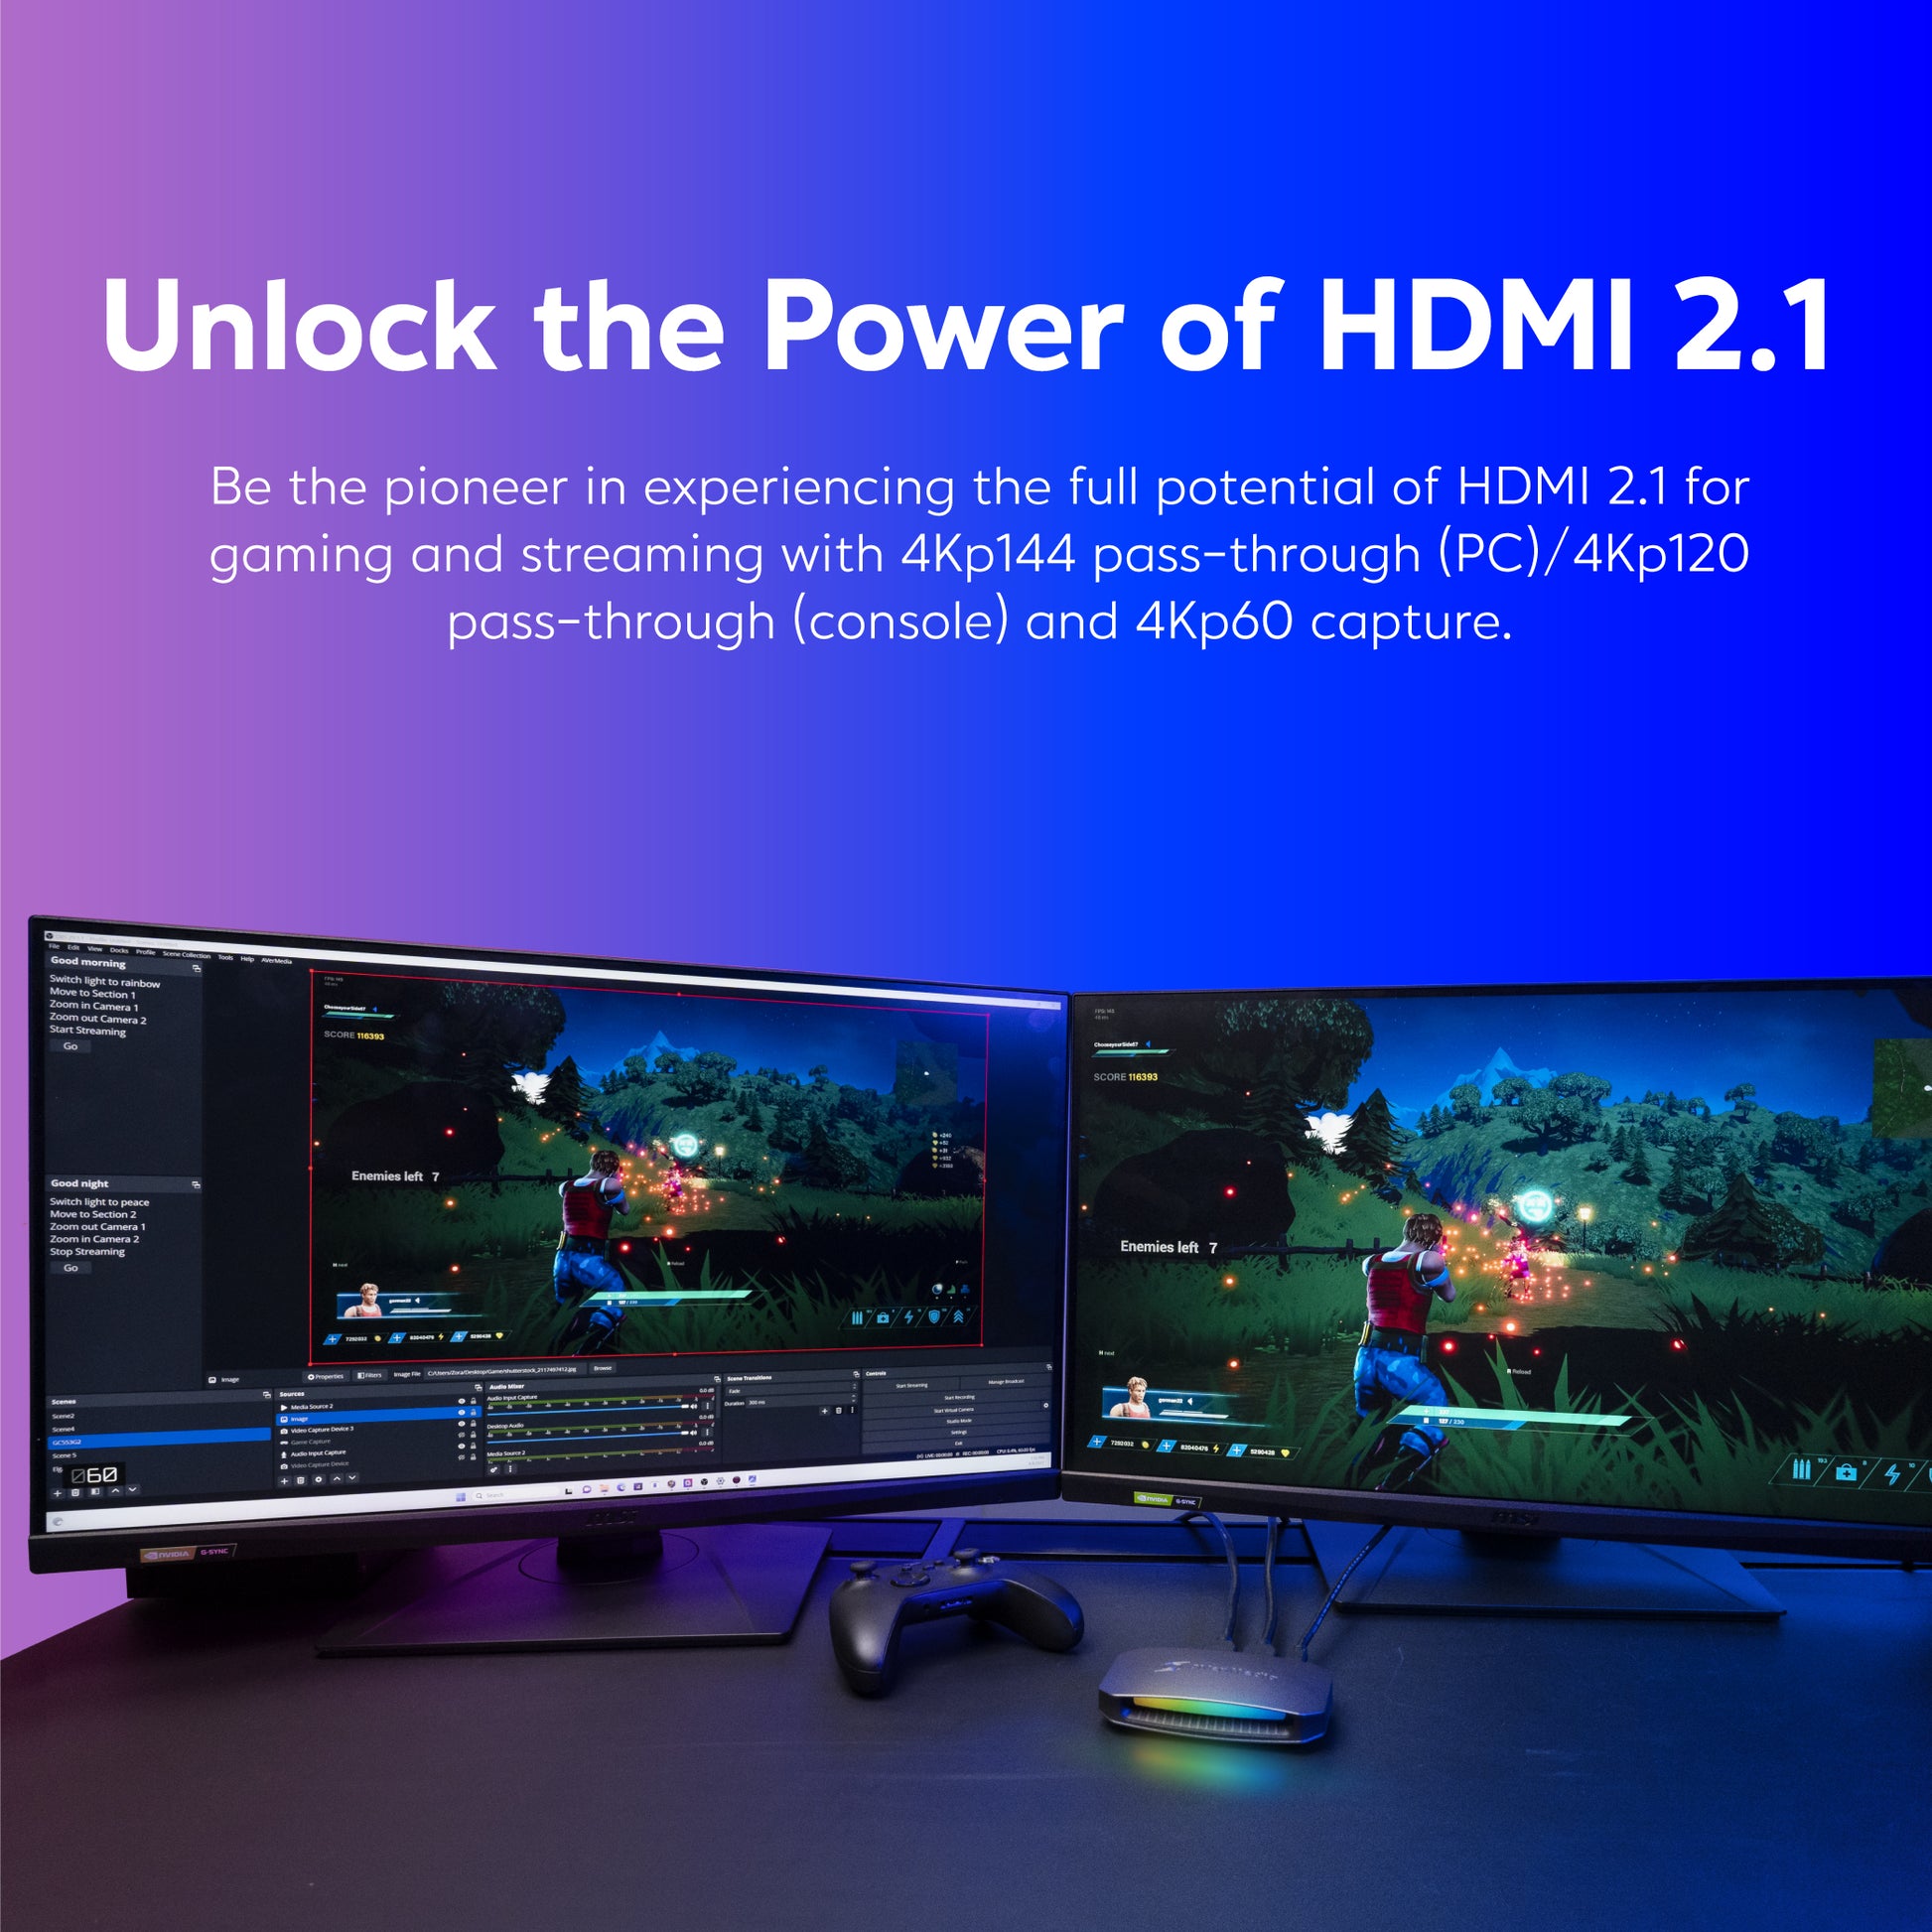 Next-gen gaming with HDMI 2.1